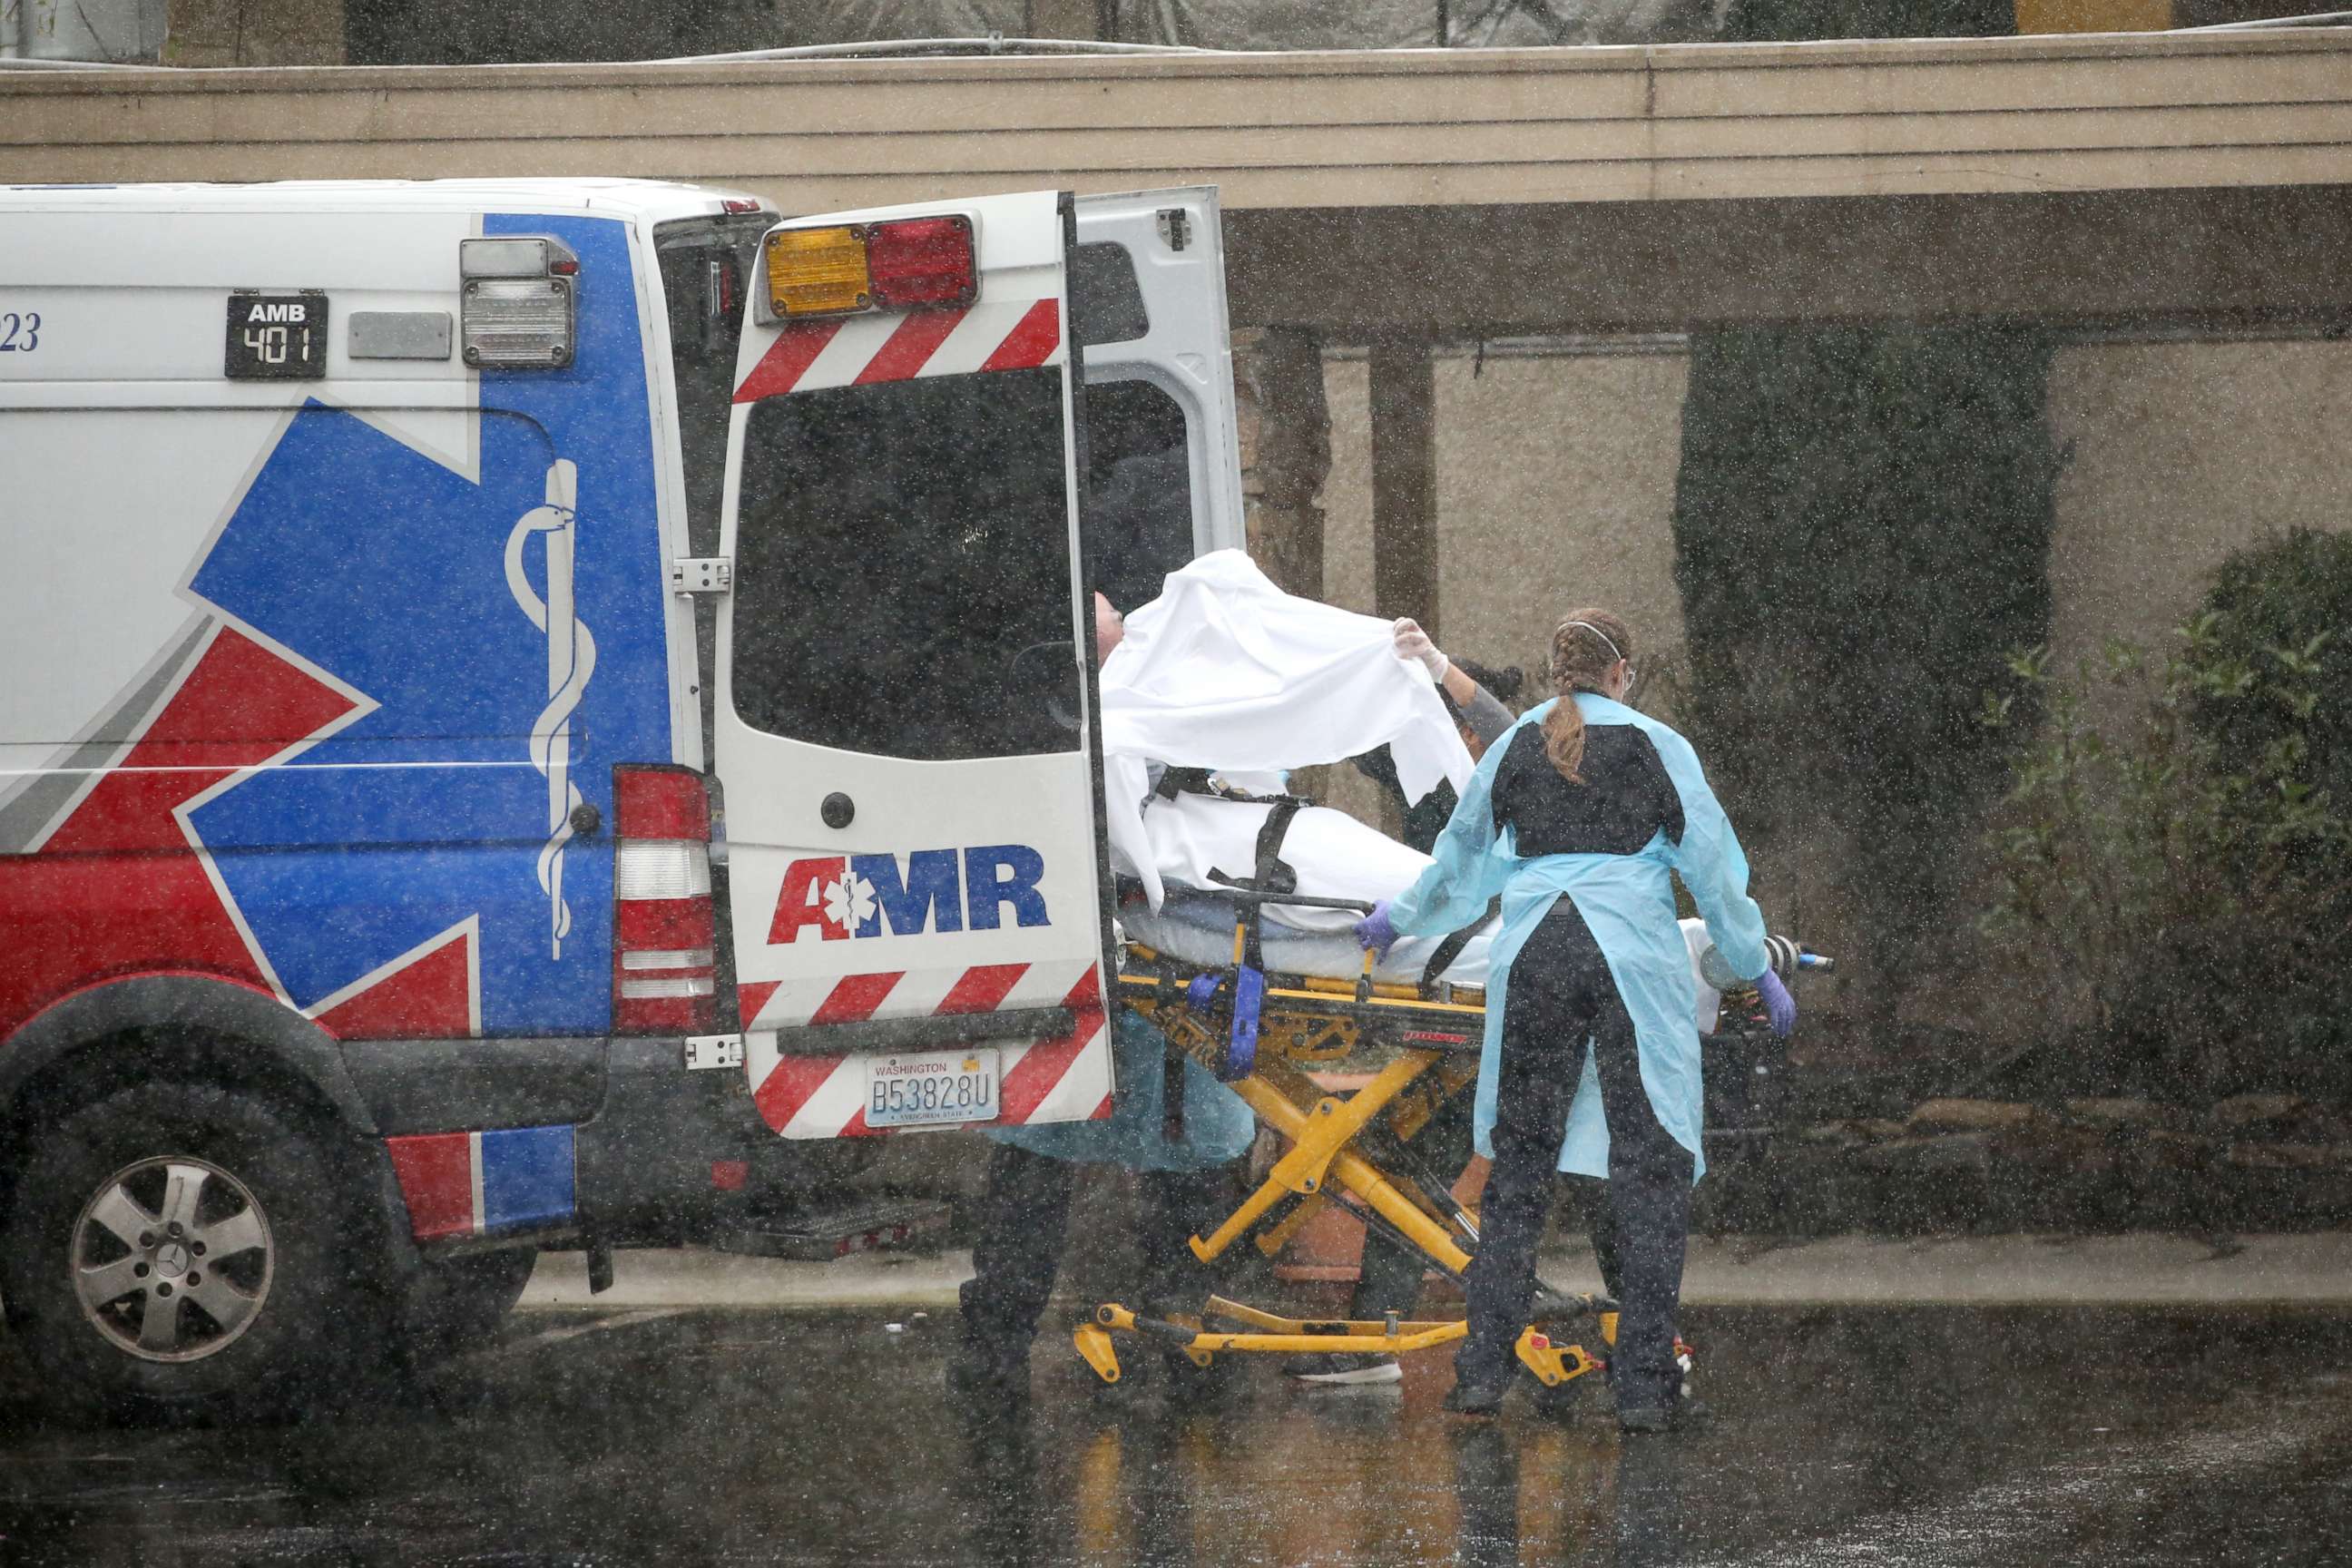 PHOTO: A patient is shielded as they are put into an ambulance during the pouring rain outside the Life Care Center of Kirkland on March 7, 2020 in Kirkland, Wash.